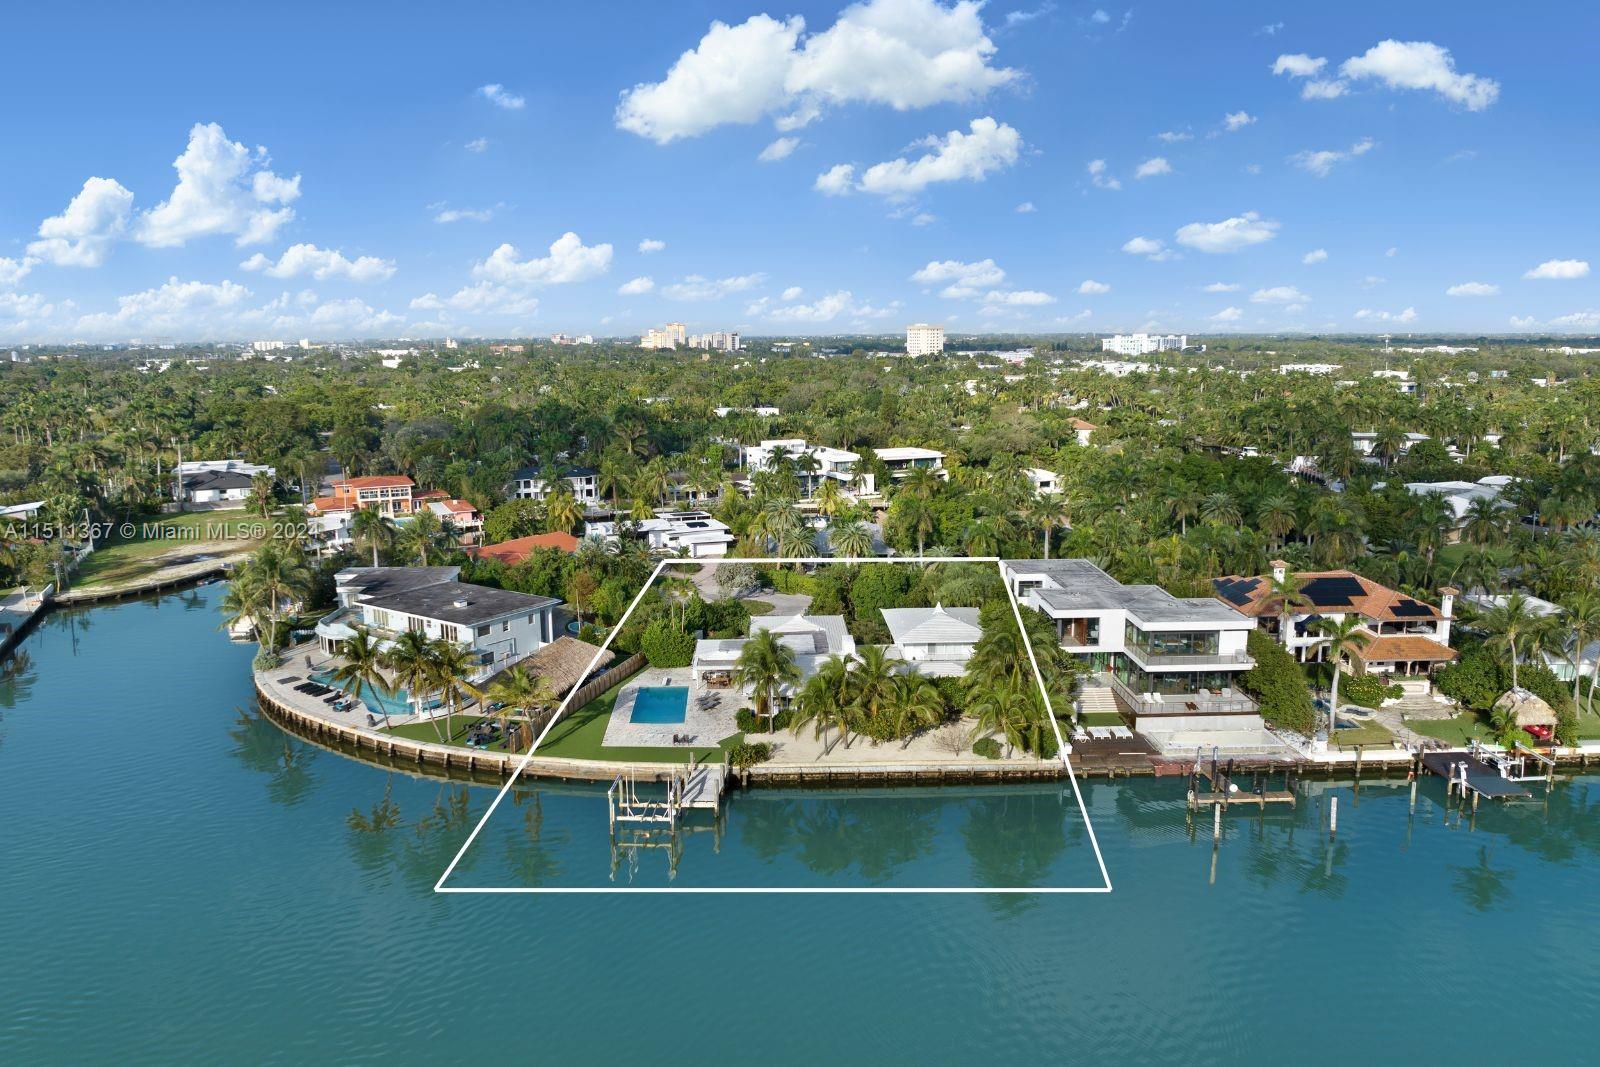 Property for Sale at 7305 Belle Meade Island Dr, Miami, Broward County, Florida - Bedrooms: 5 
Bathrooms: 7  - $11,750,000